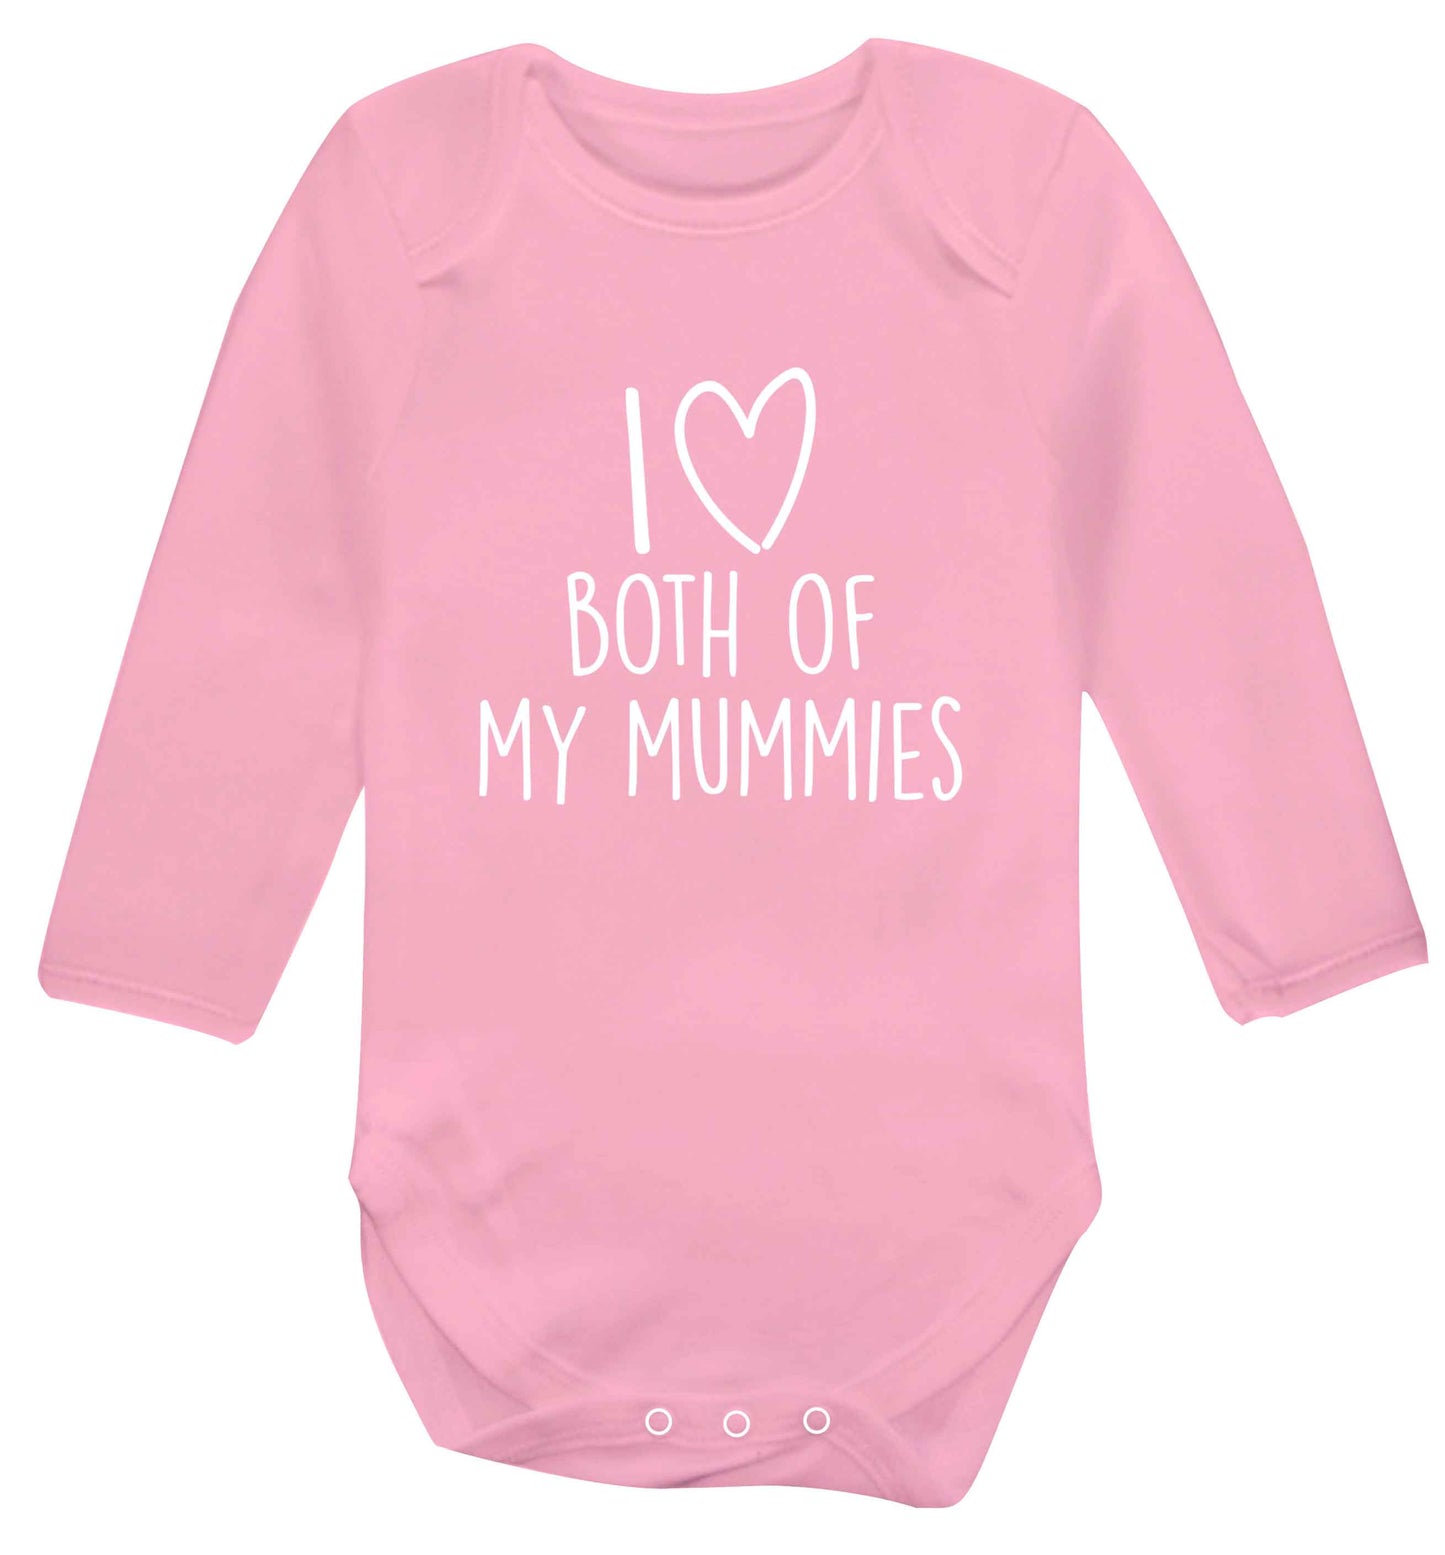 I love both of my mummies baby vest long sleeved pale pink 6-12 months